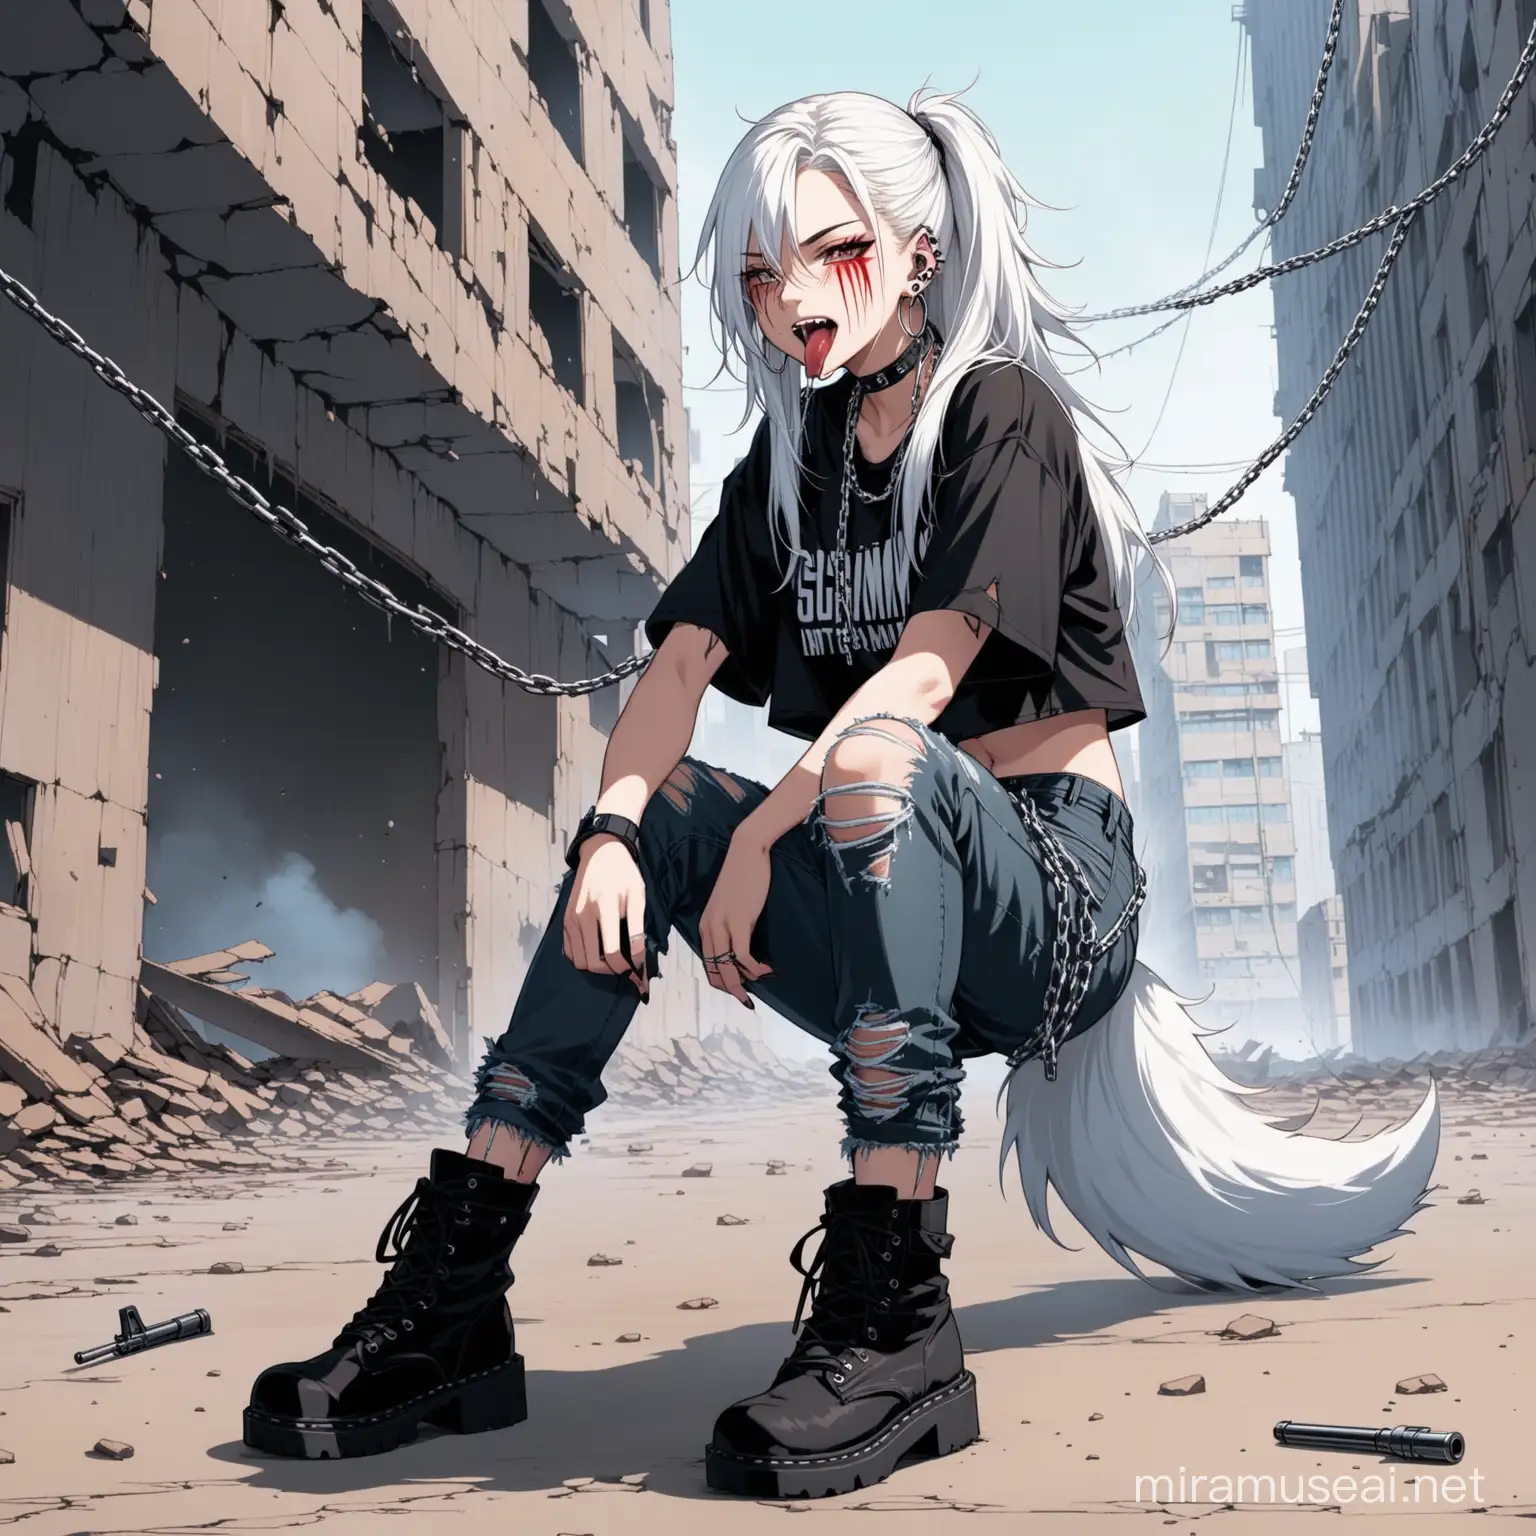 happy and depressed at the same time, not social, lazy, not too high crop top, black ripped baggy jeans with a chain, multiple piercing in ear and 1 in tongue, wearing black army boots with heel, white hair in a wolf cut, half up half down with a red streak, black face marking on left side of face, 18 yr old girl, in front of a falling down building holding a gun